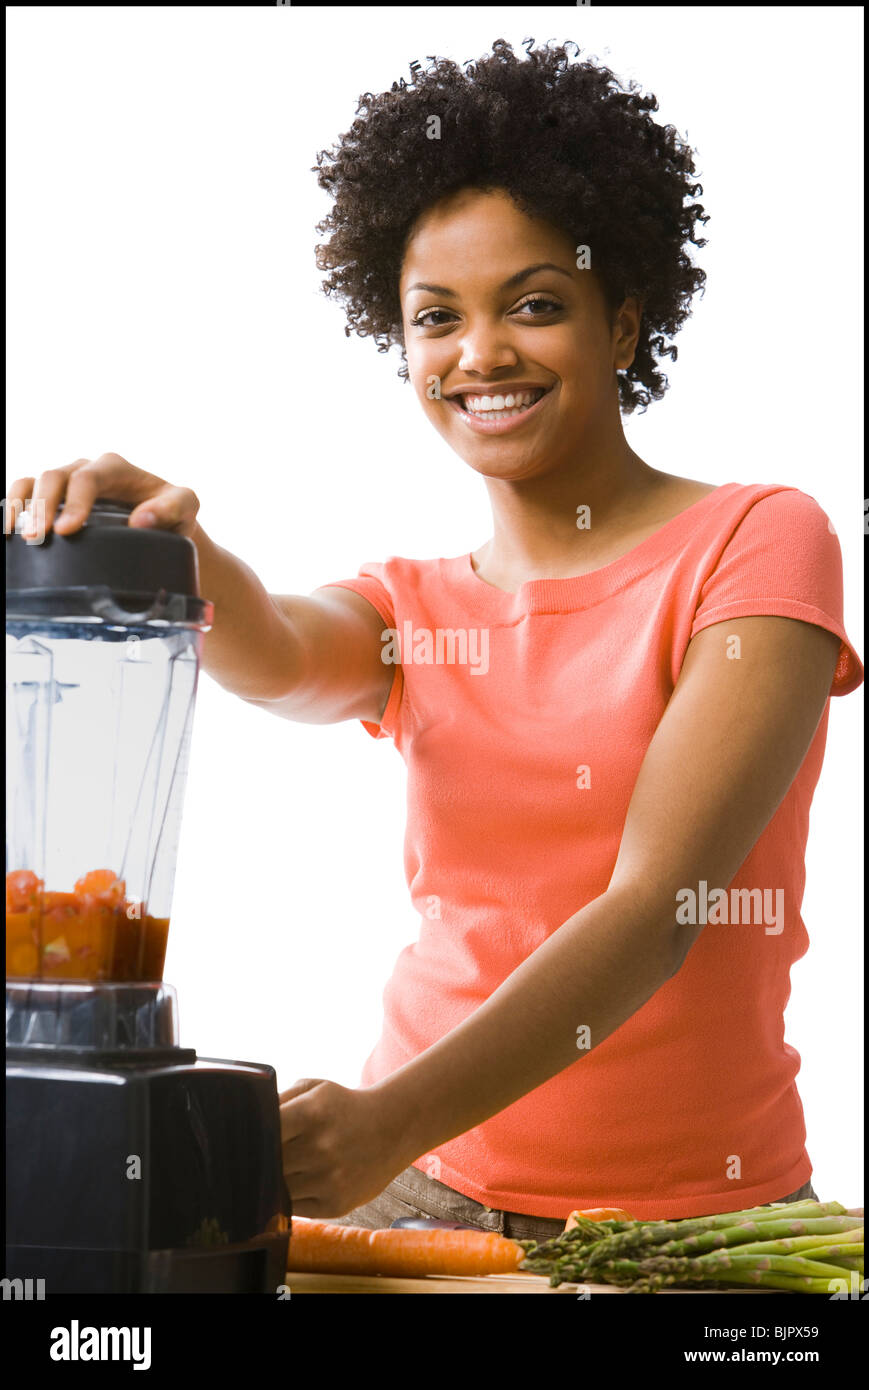 Woman using a blender Stock Photo